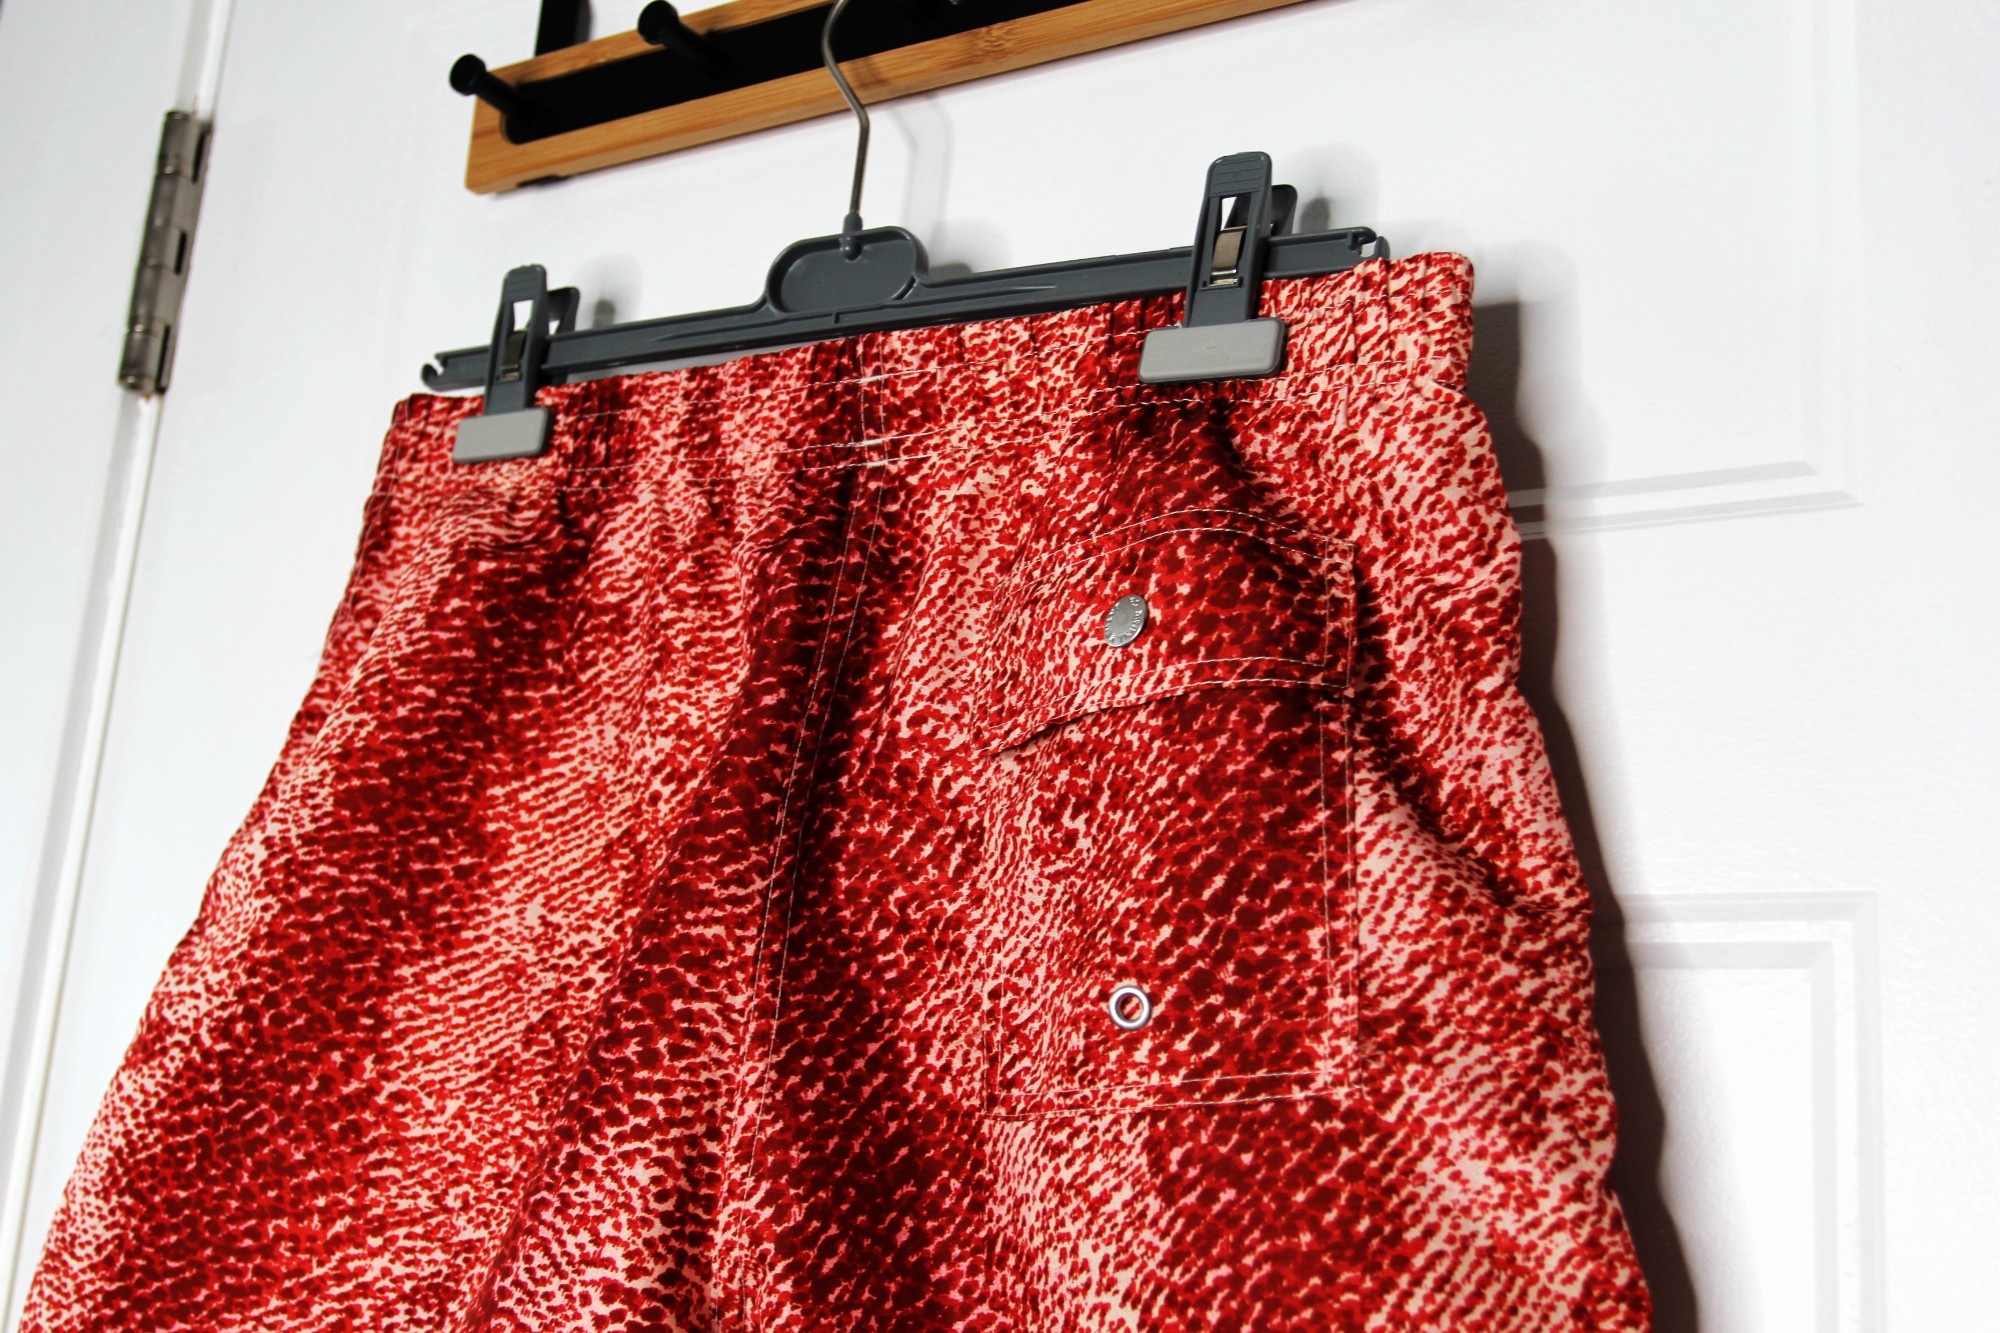 BNWT SS23 BATHER RED PAINTED MOSS SWIM SHORTS M - 5